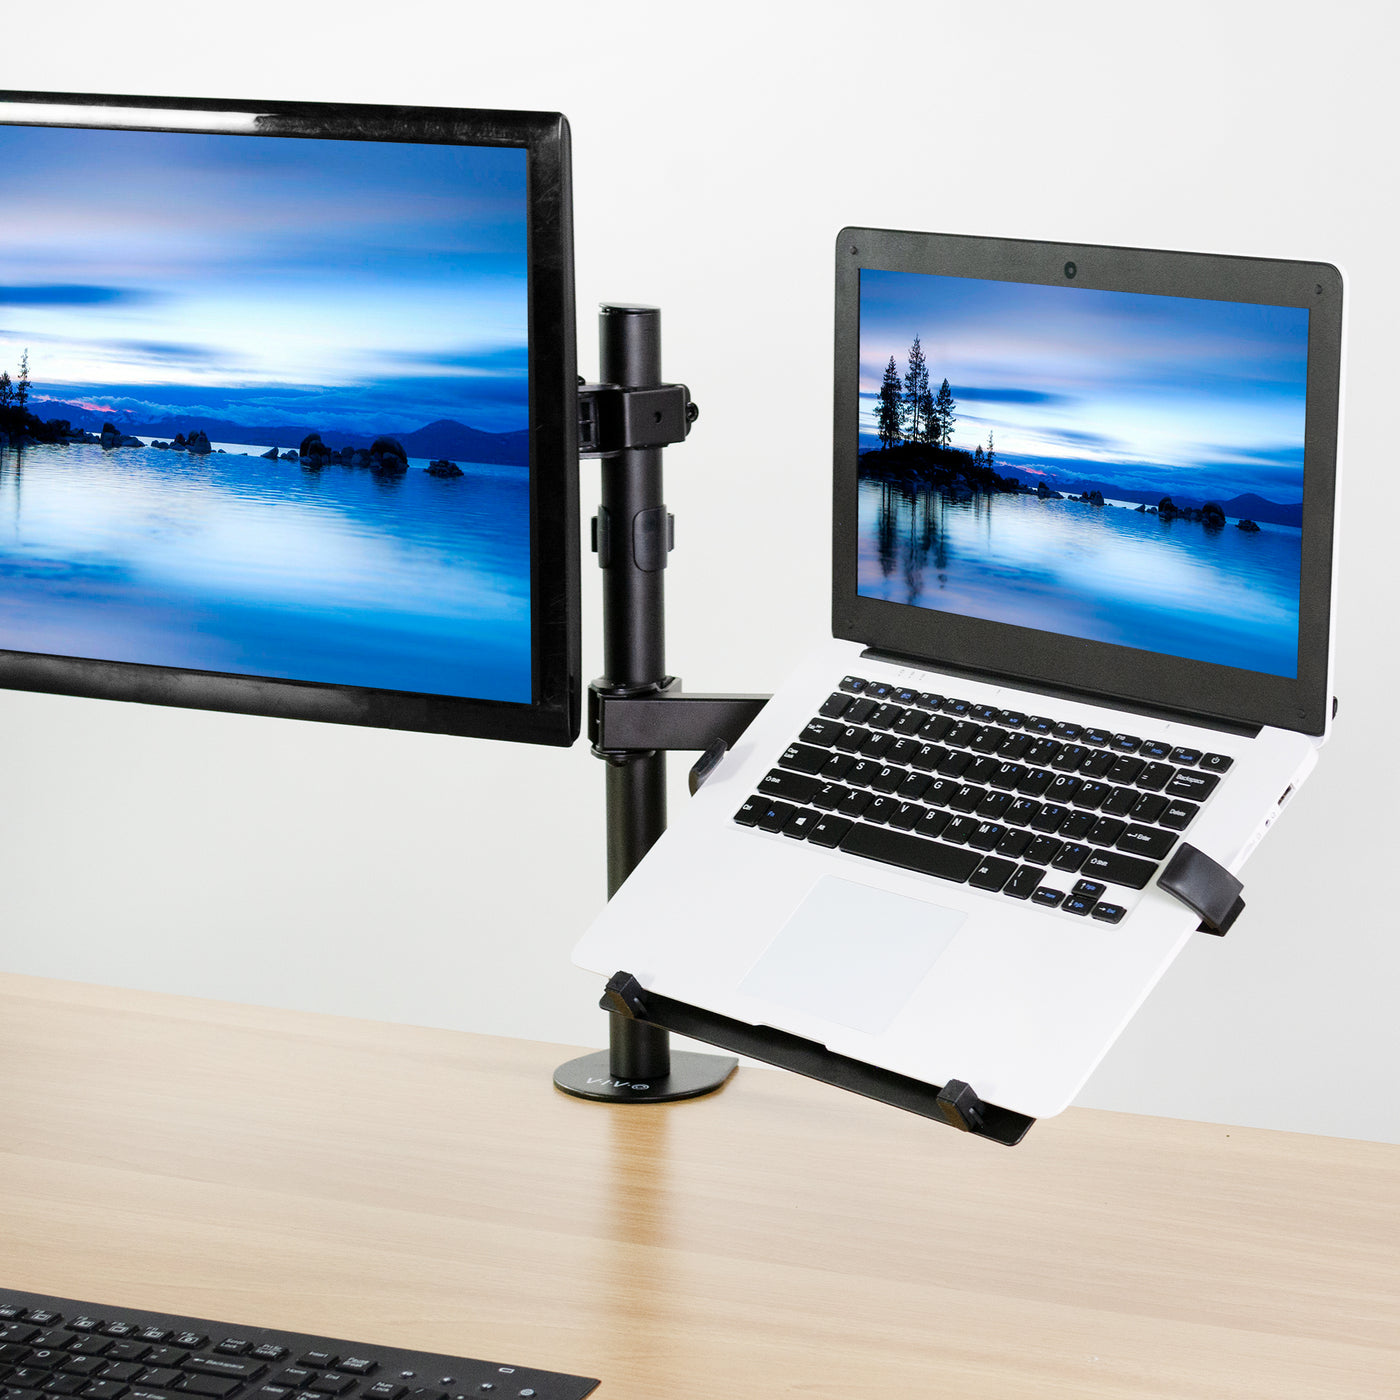 Versatile laptop stand plate that can support tablets and more. 